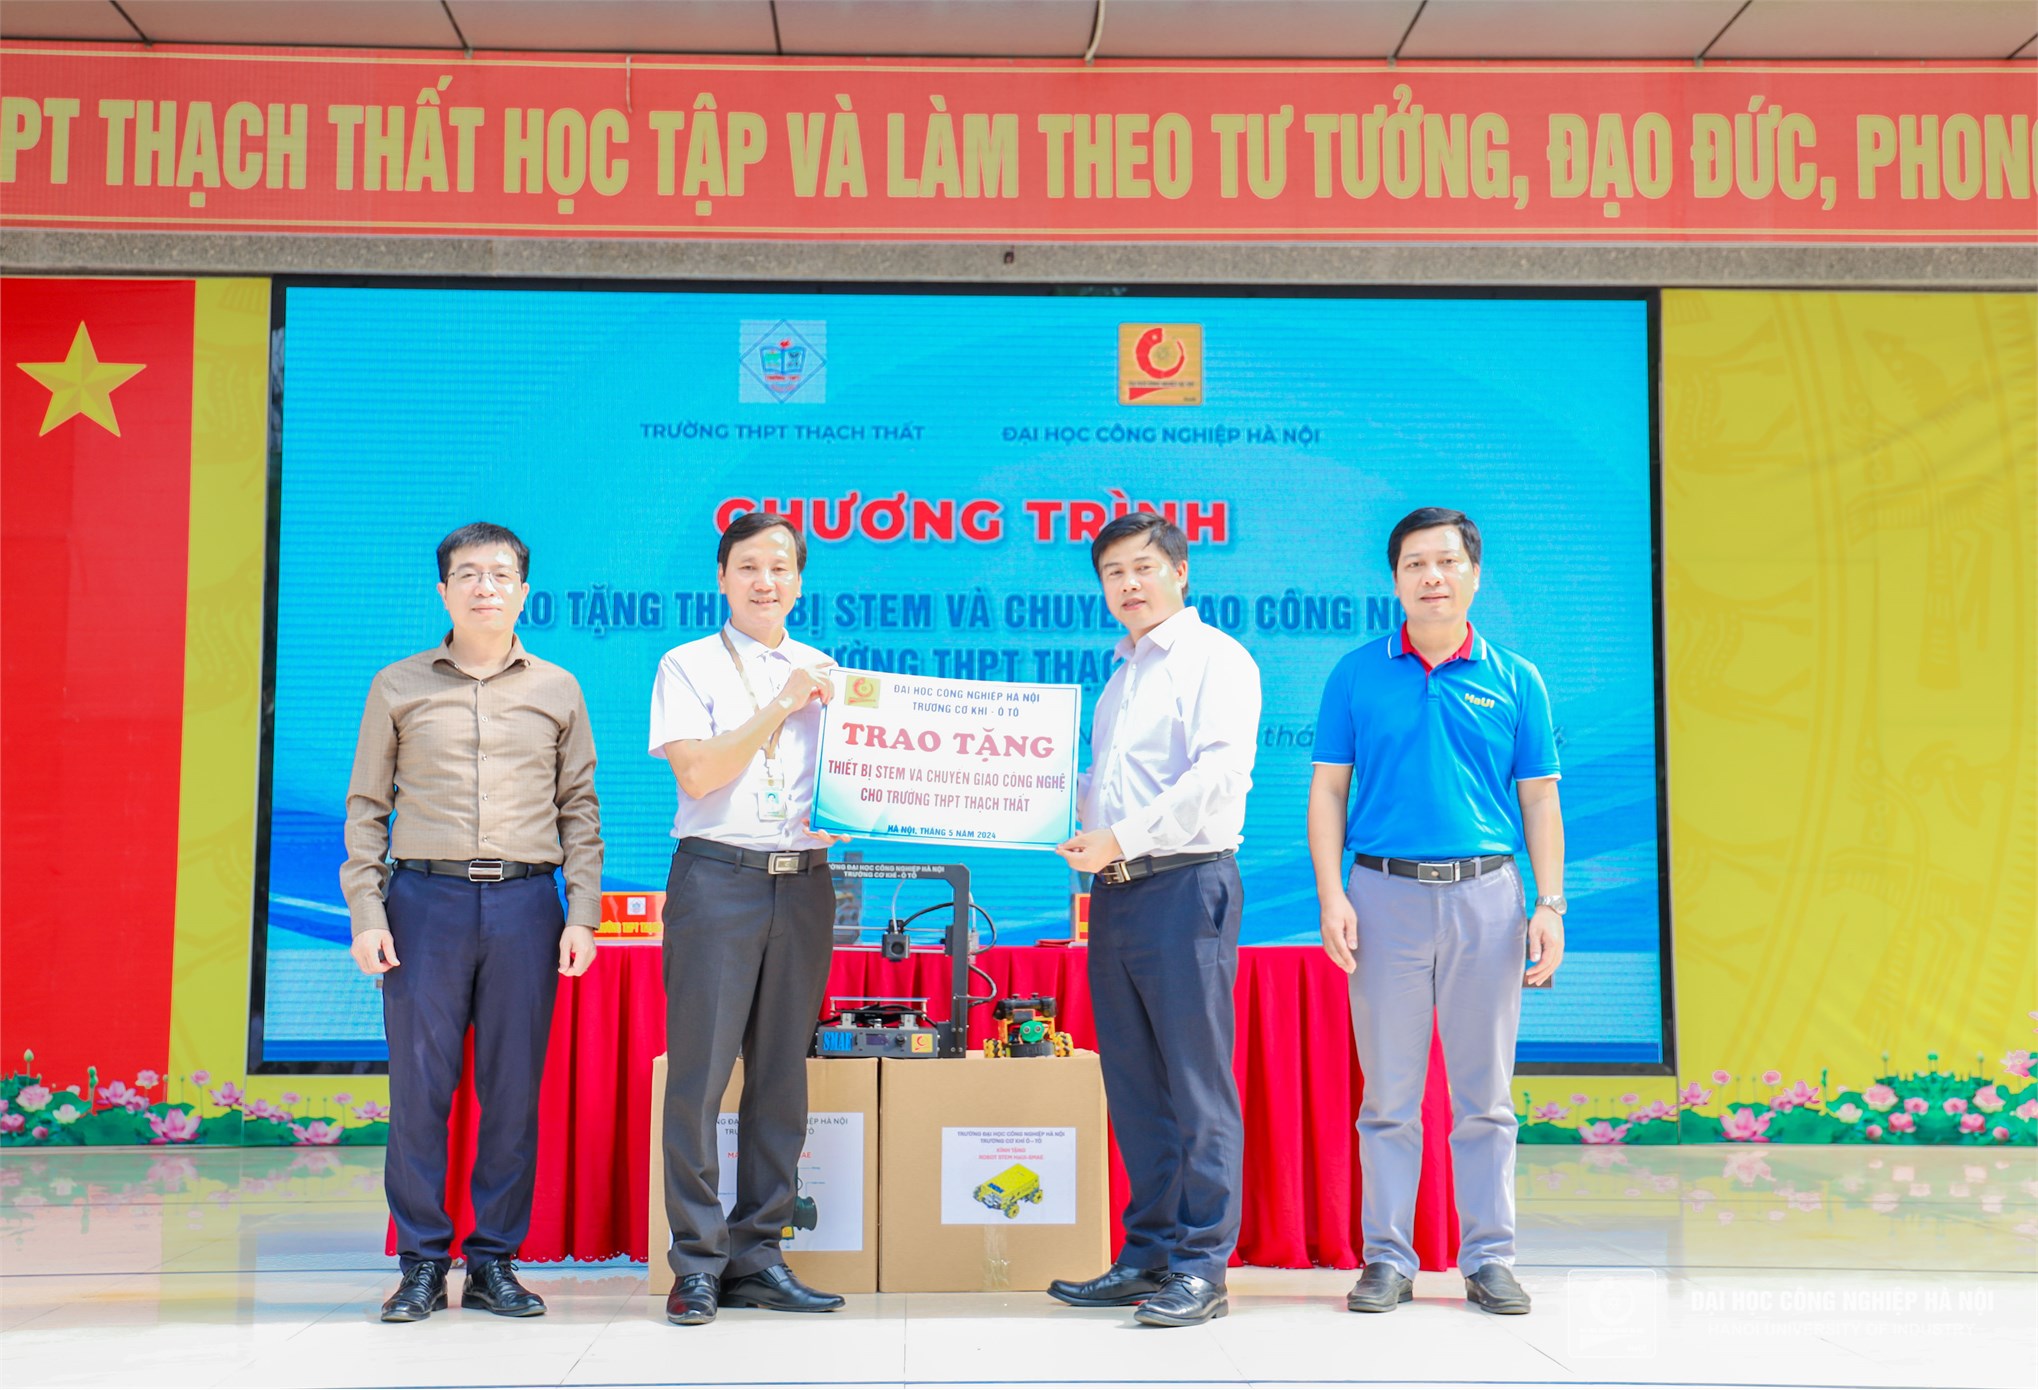 SMAE has formalized a partnership with Thach That High School through a memorandum of understanding (MoU)